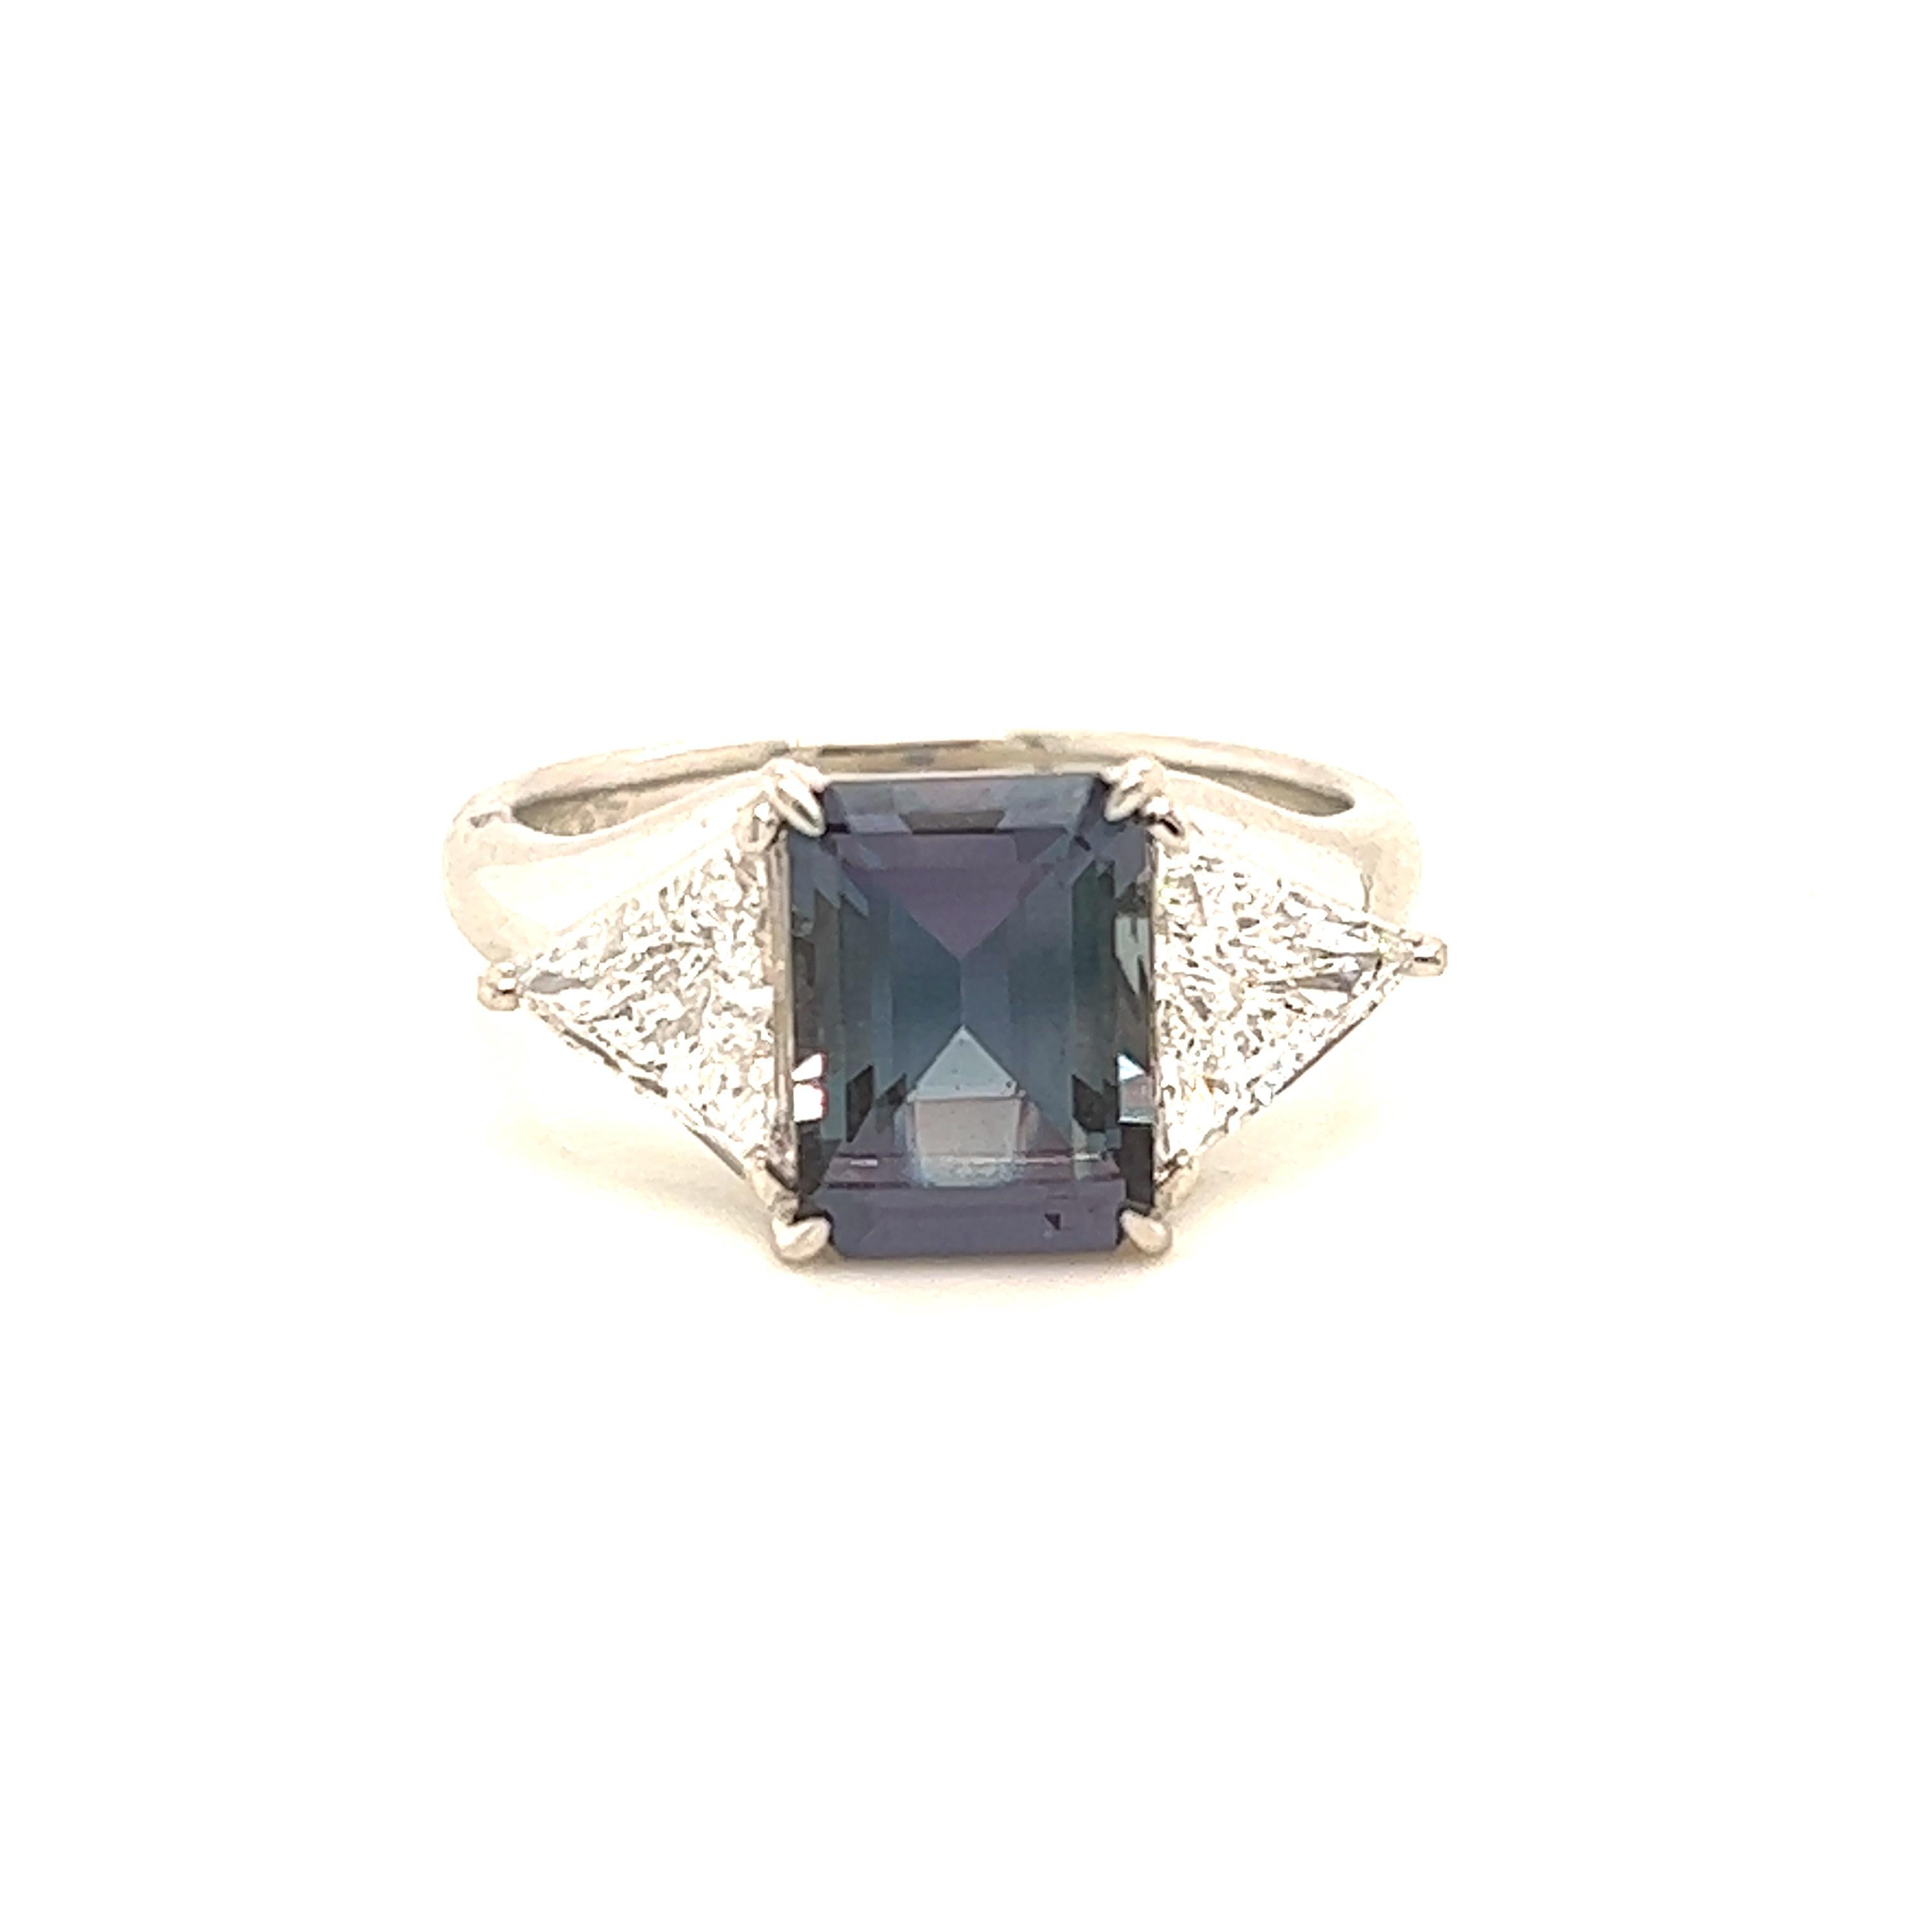 This is a gorgeous natural AAA quality emerald Alexandrite surrounded by dainty diamonds that is set in a vintage platinum setting. This ring features a natural 2.62 carat emerald alexandrite that is certified by the Gemological Institute of America